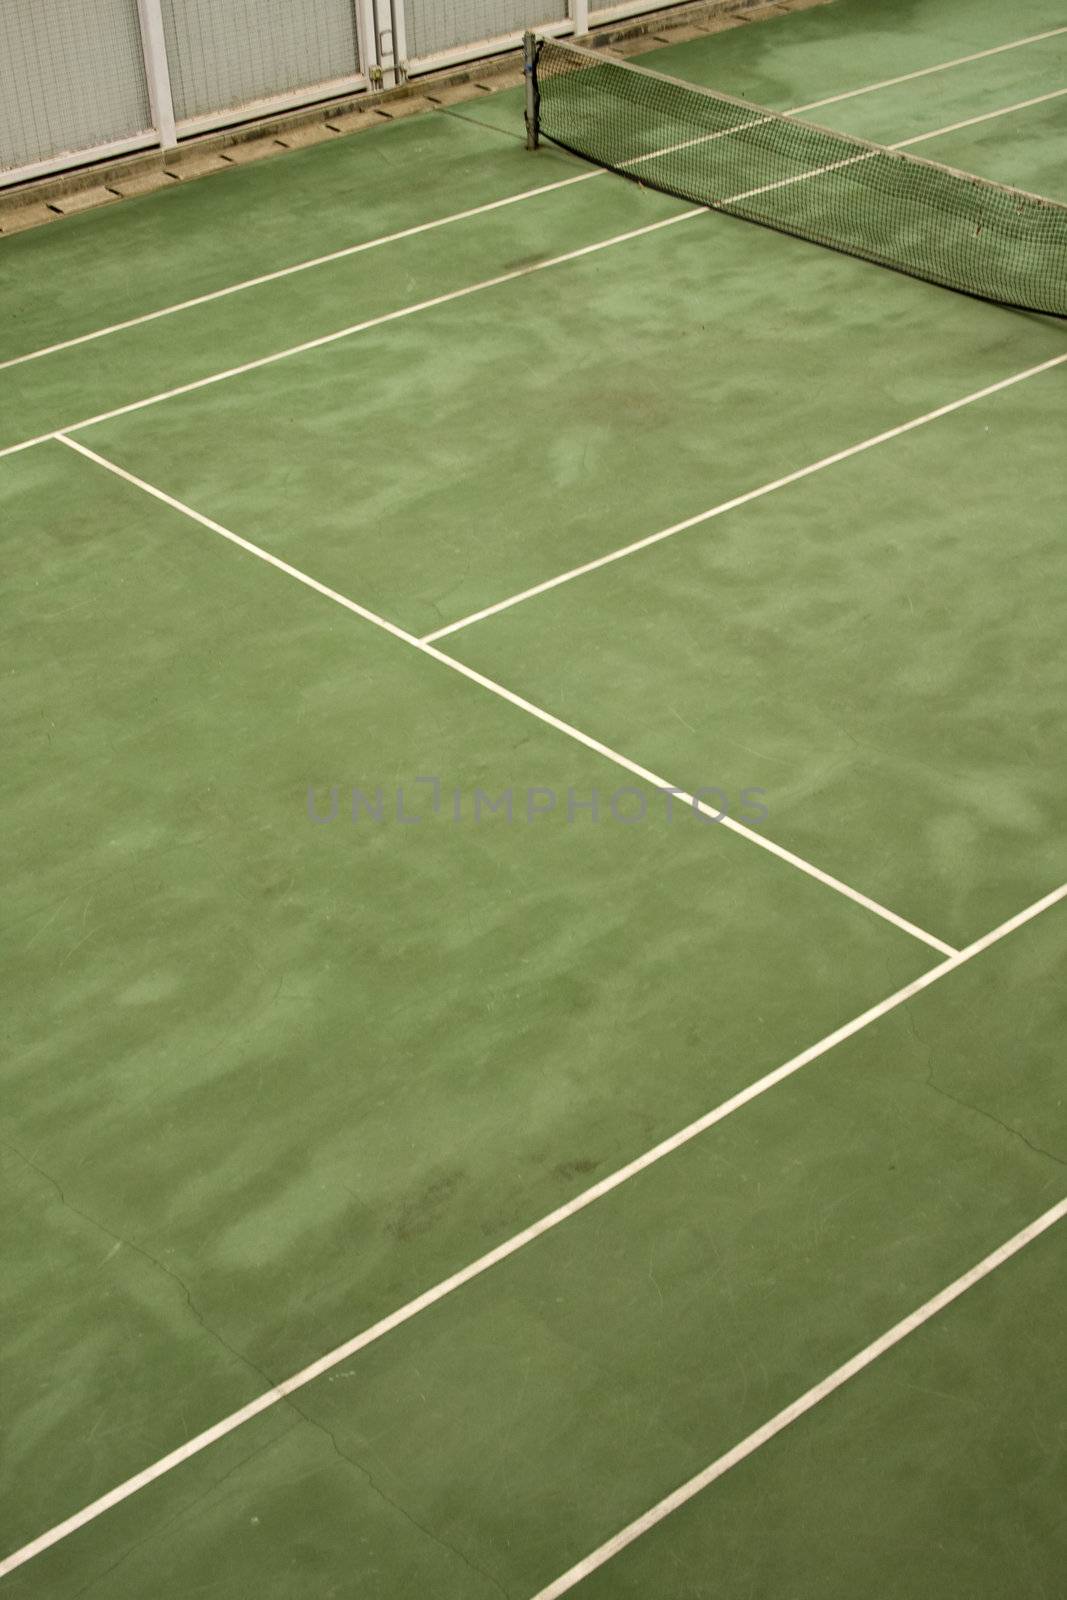 It is a stie for people to play tennis